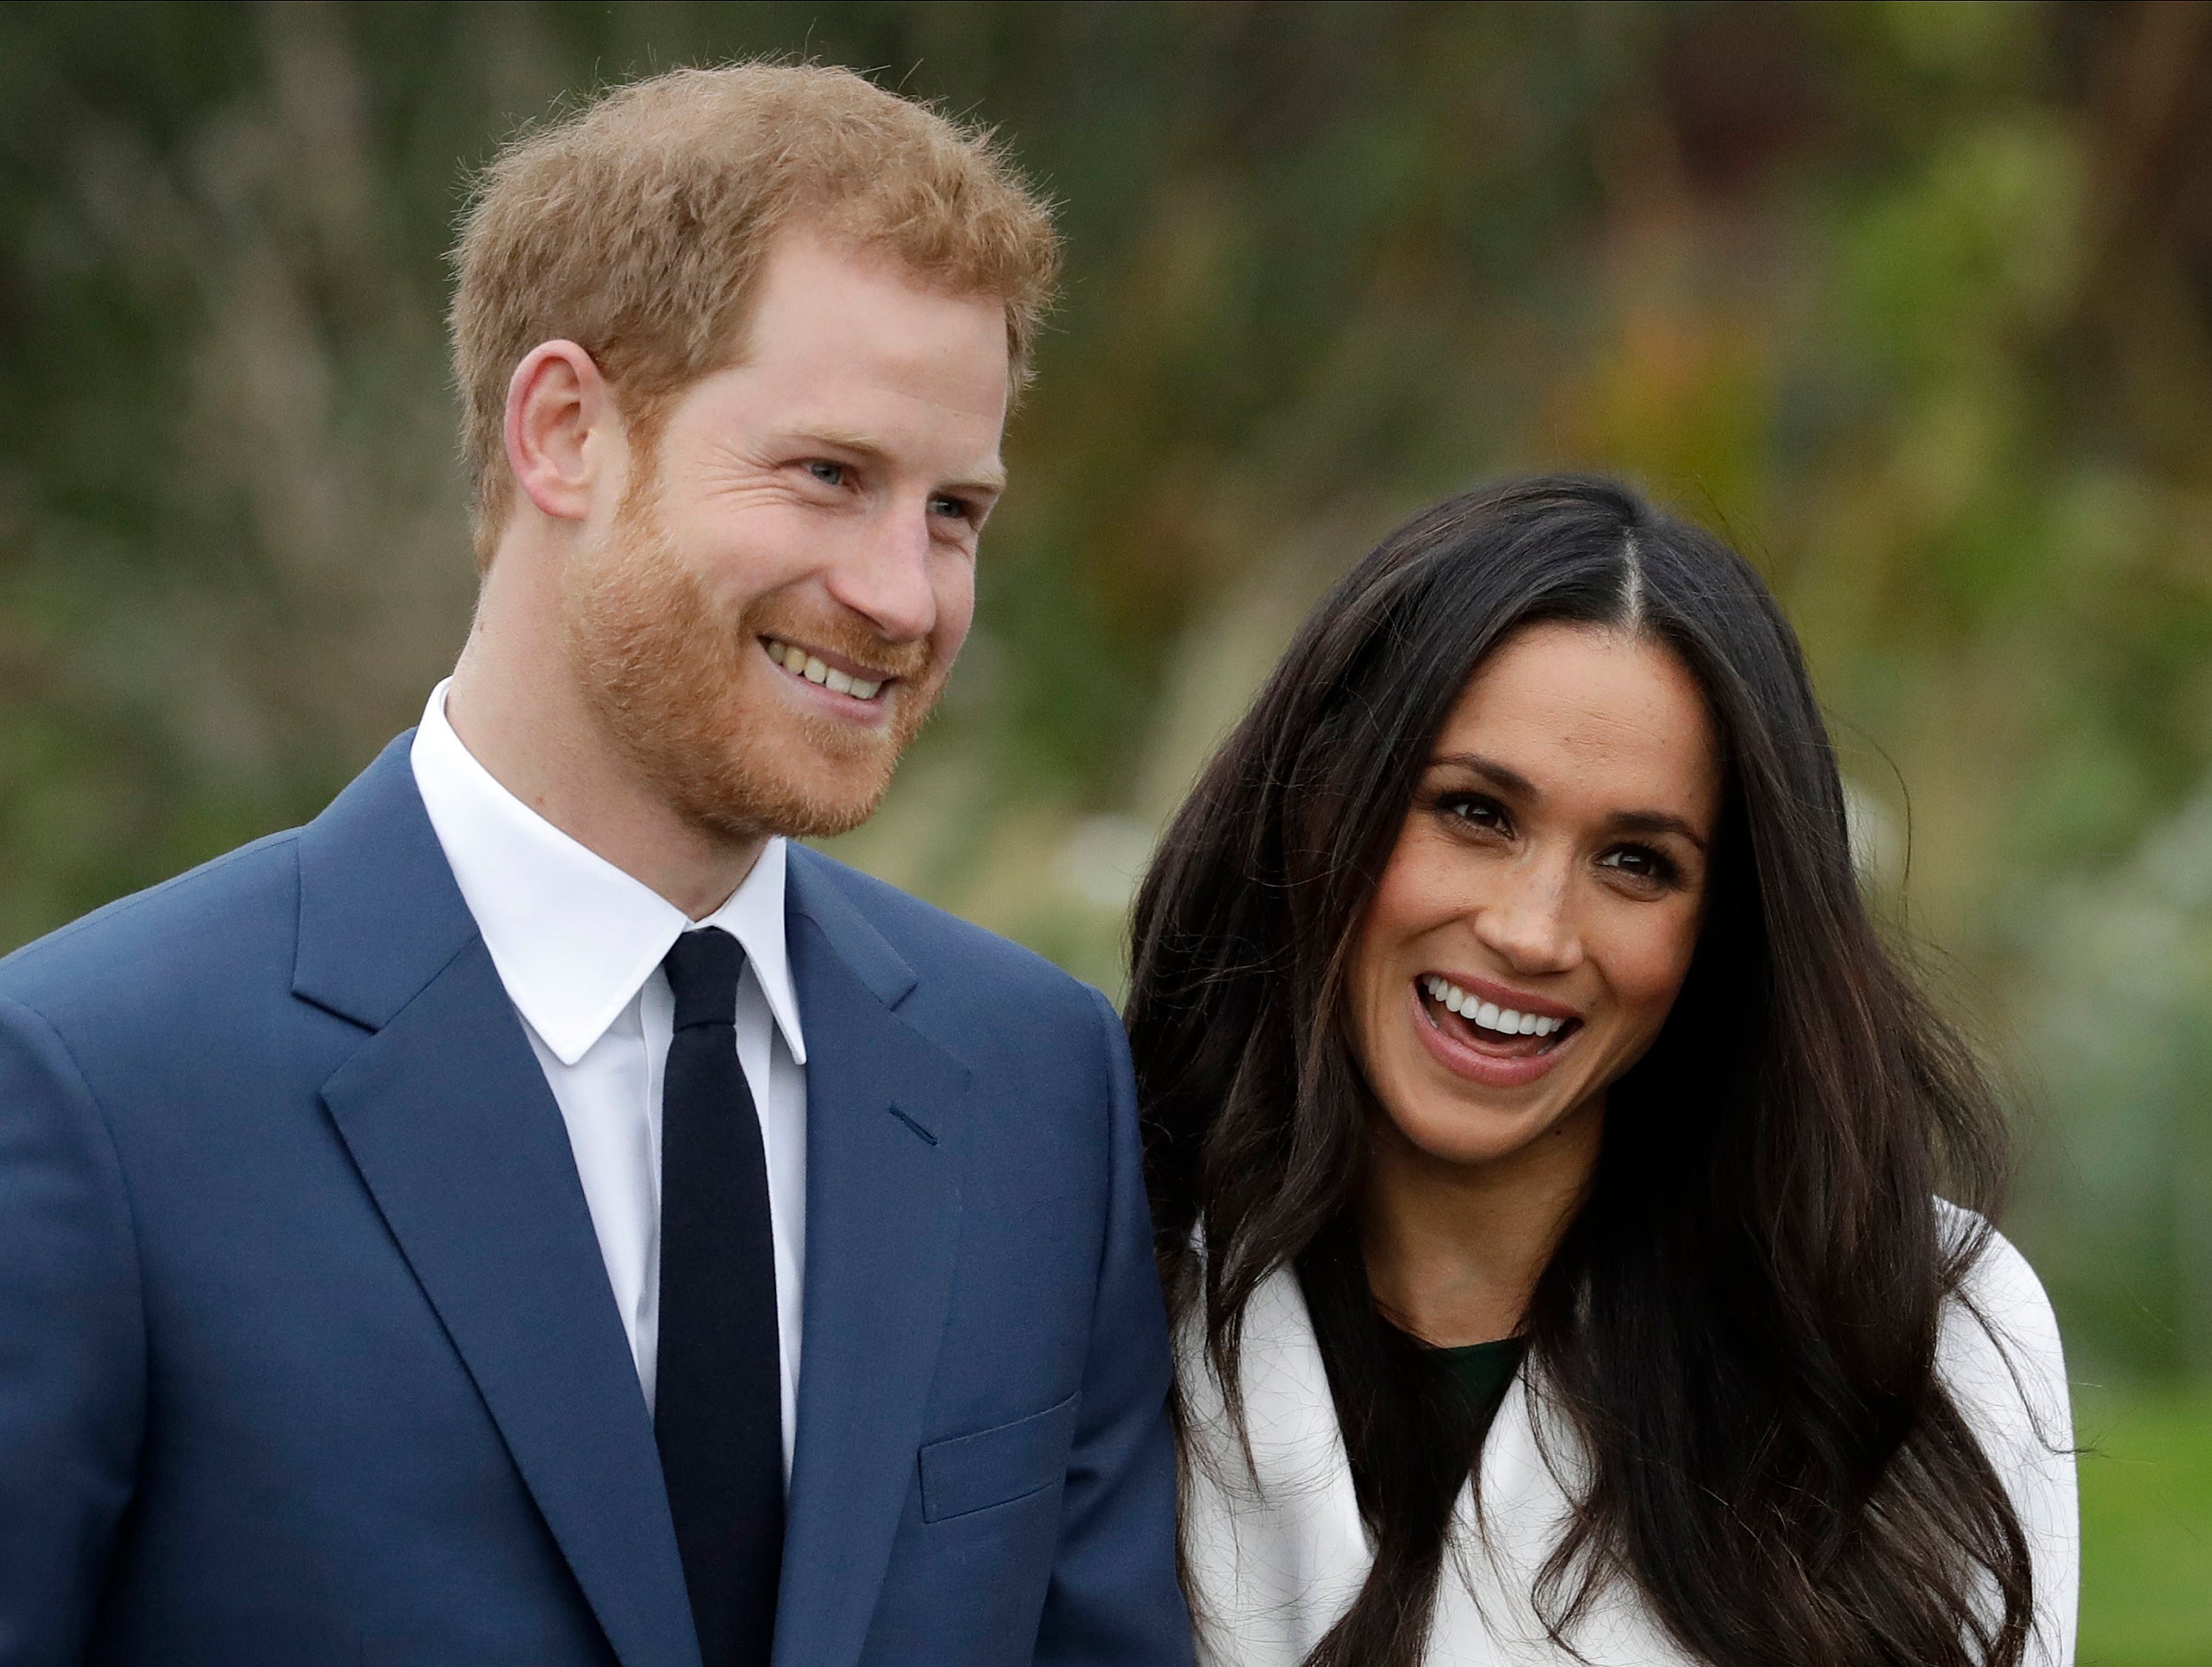 The Duke and Duchess of Sussex are scaling back their public activities